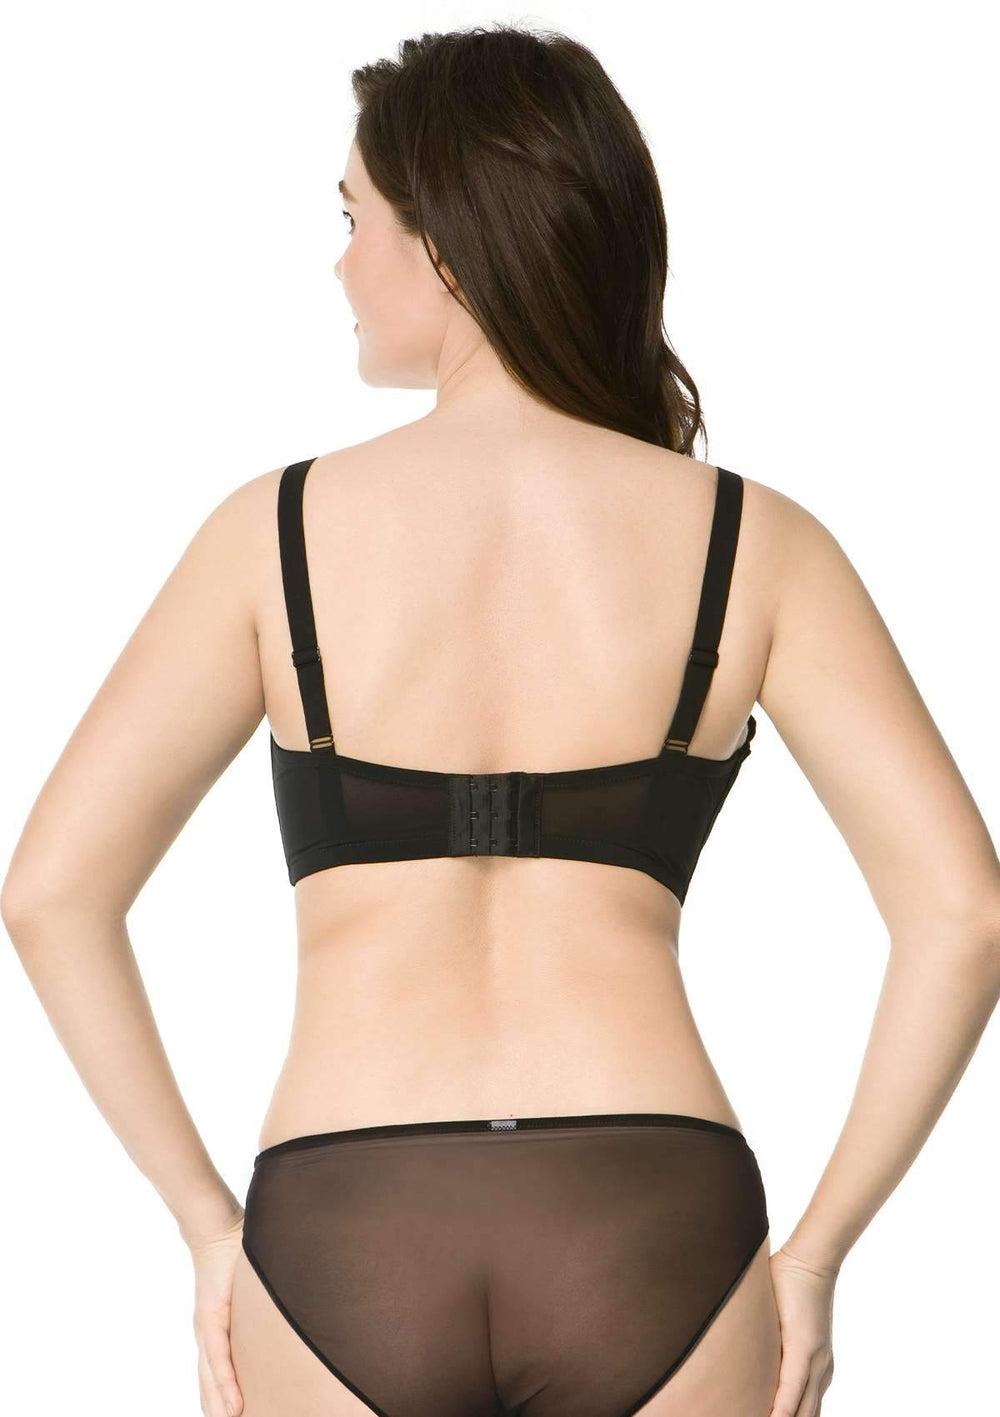 Unlined Bras: Underwire, Lace & Sheer